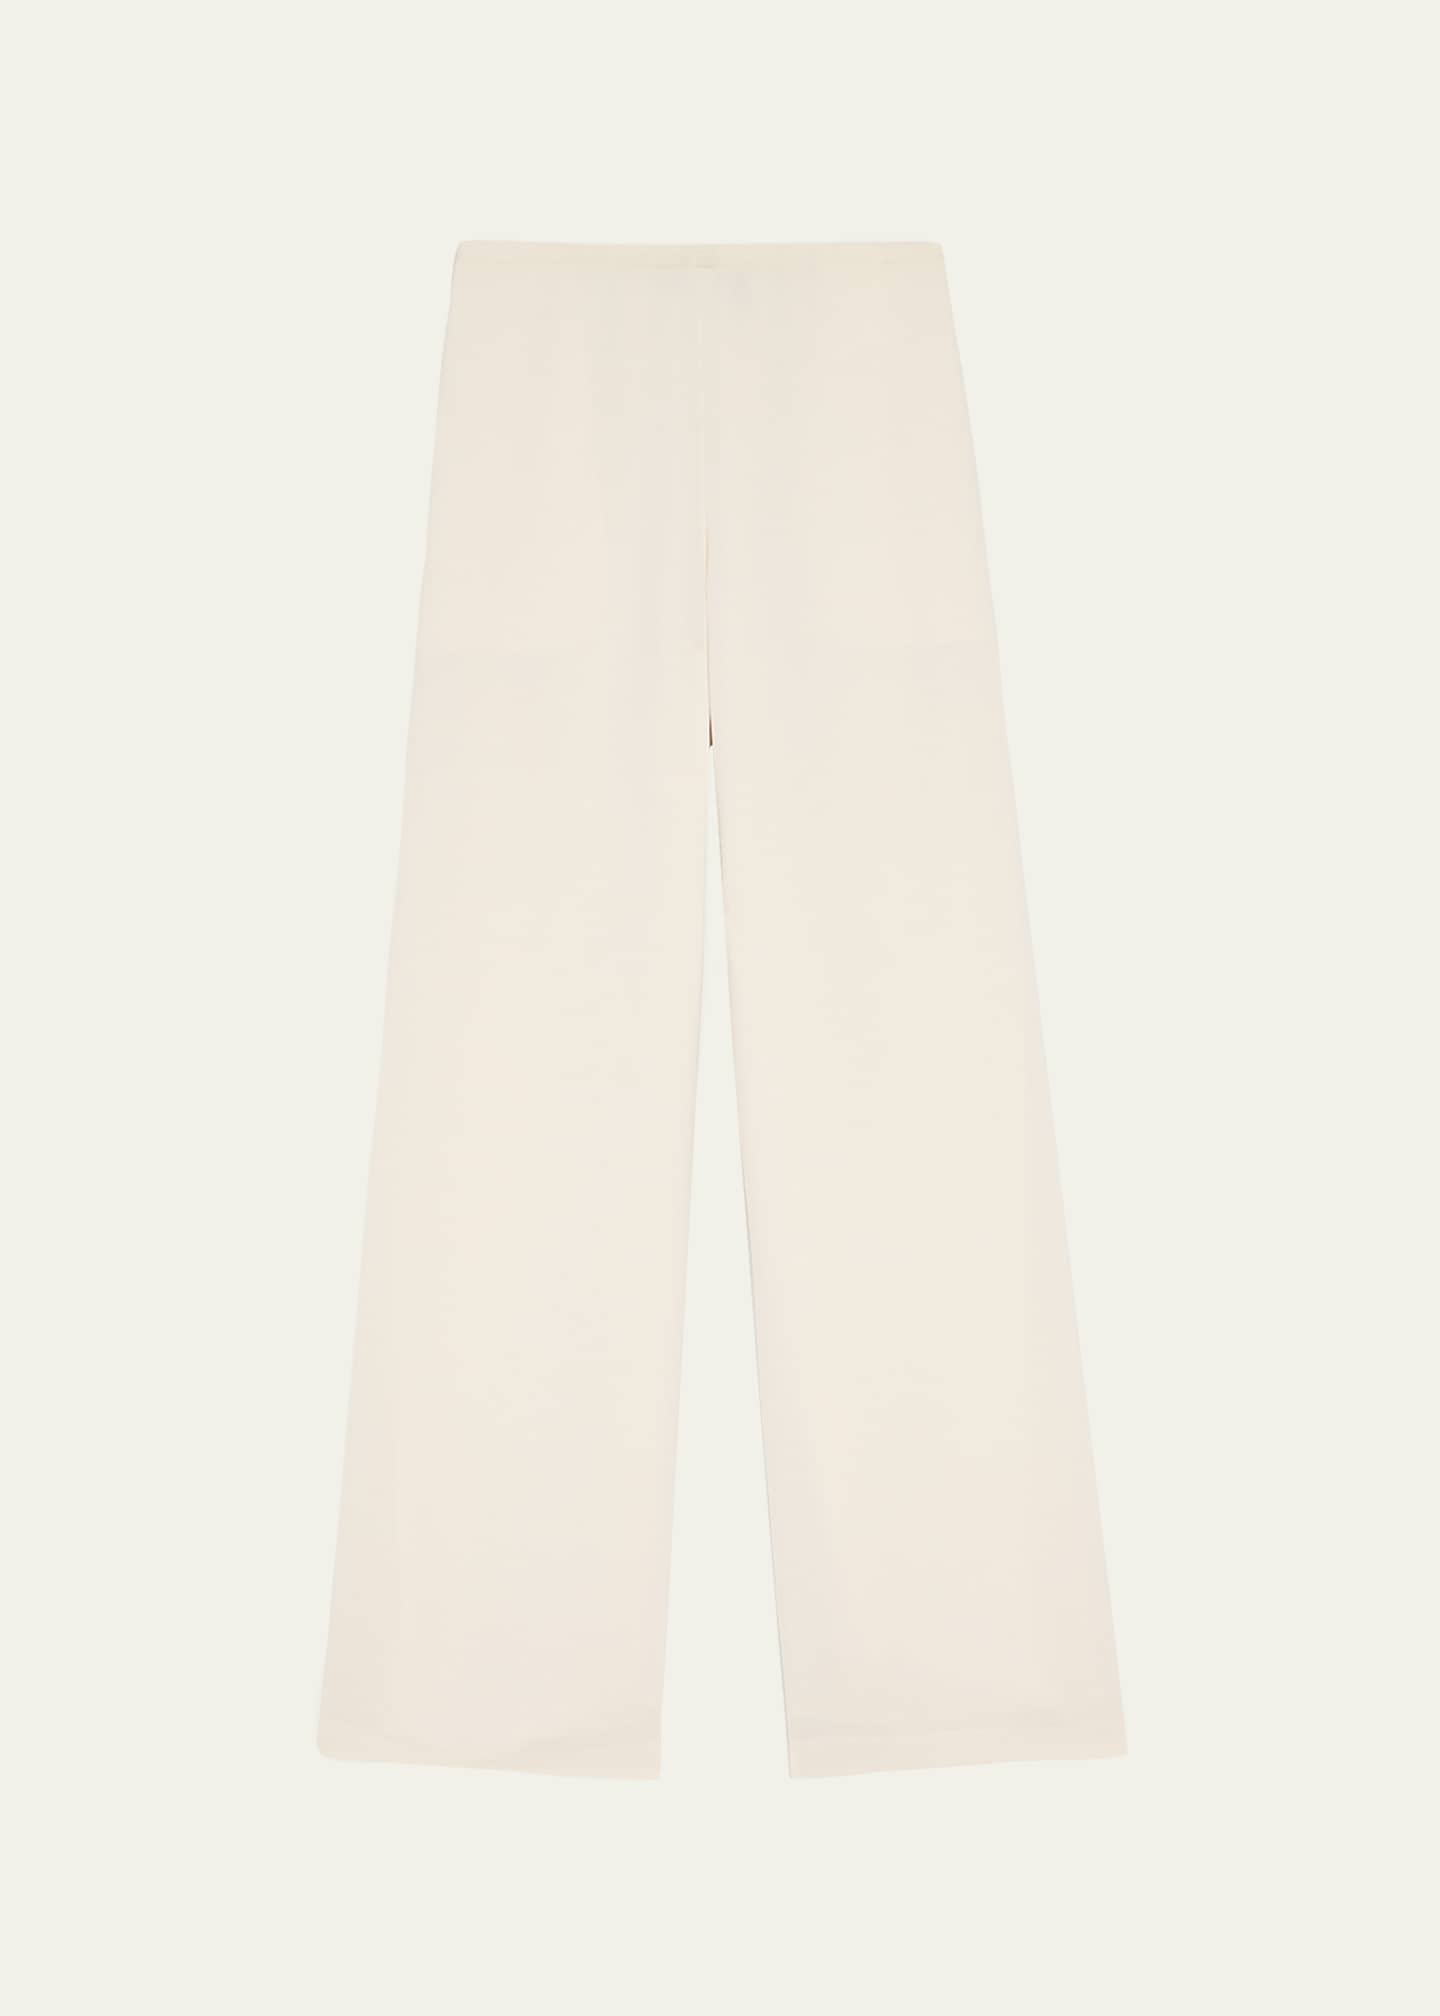 Theory Oxford Crepe Wide-Leg Pull-On Pants